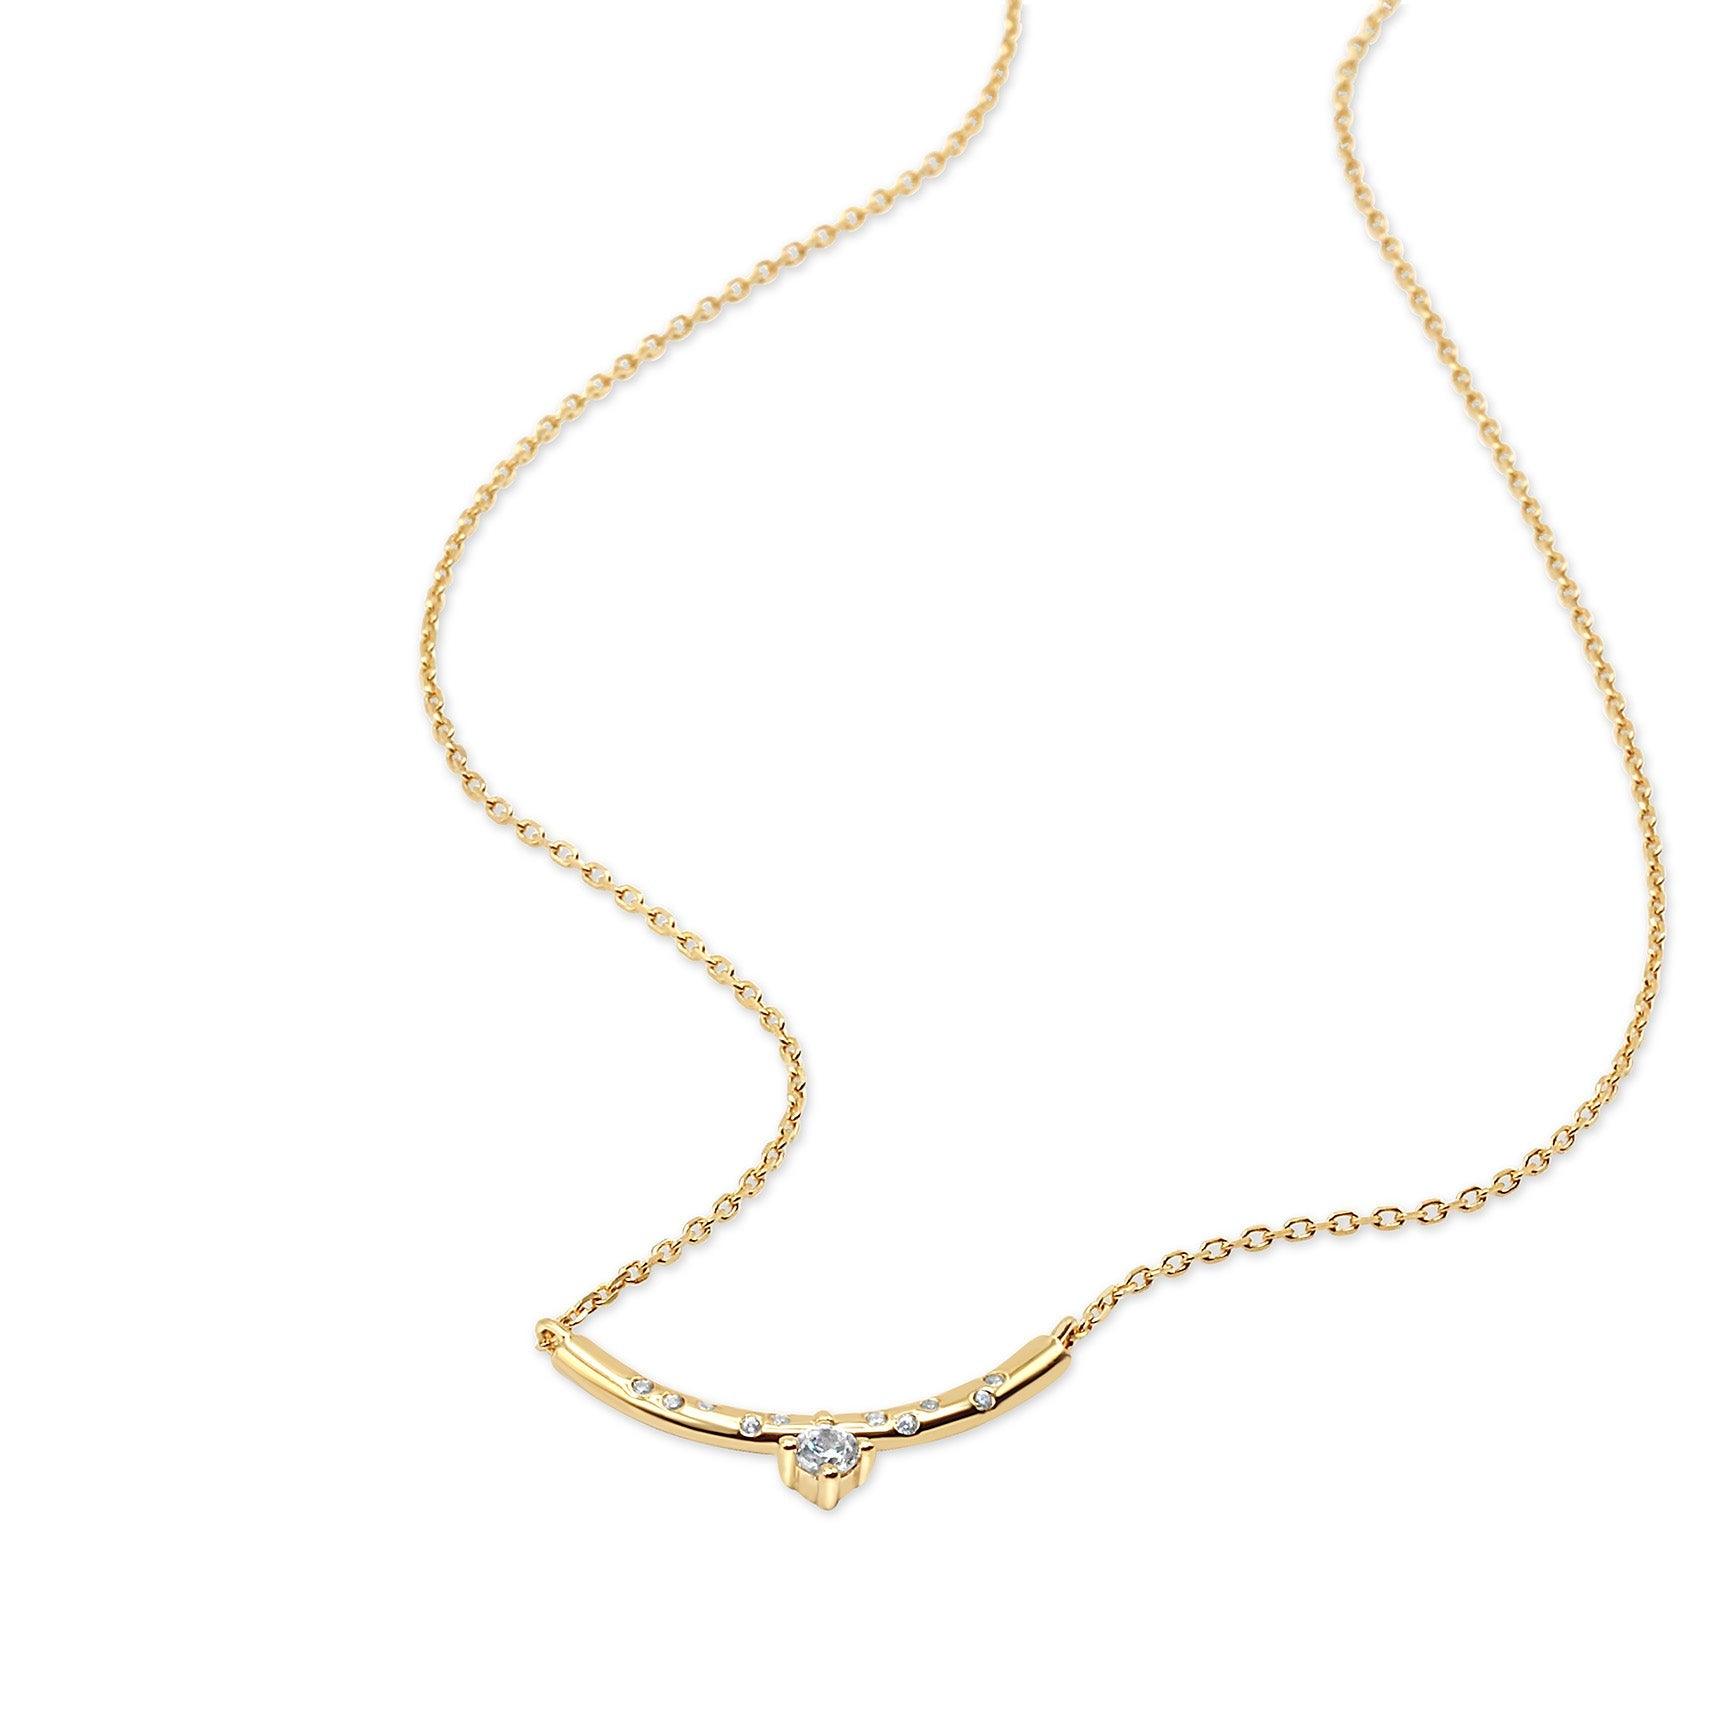 Lux Brumalis Necklace - Ptera Jewelry